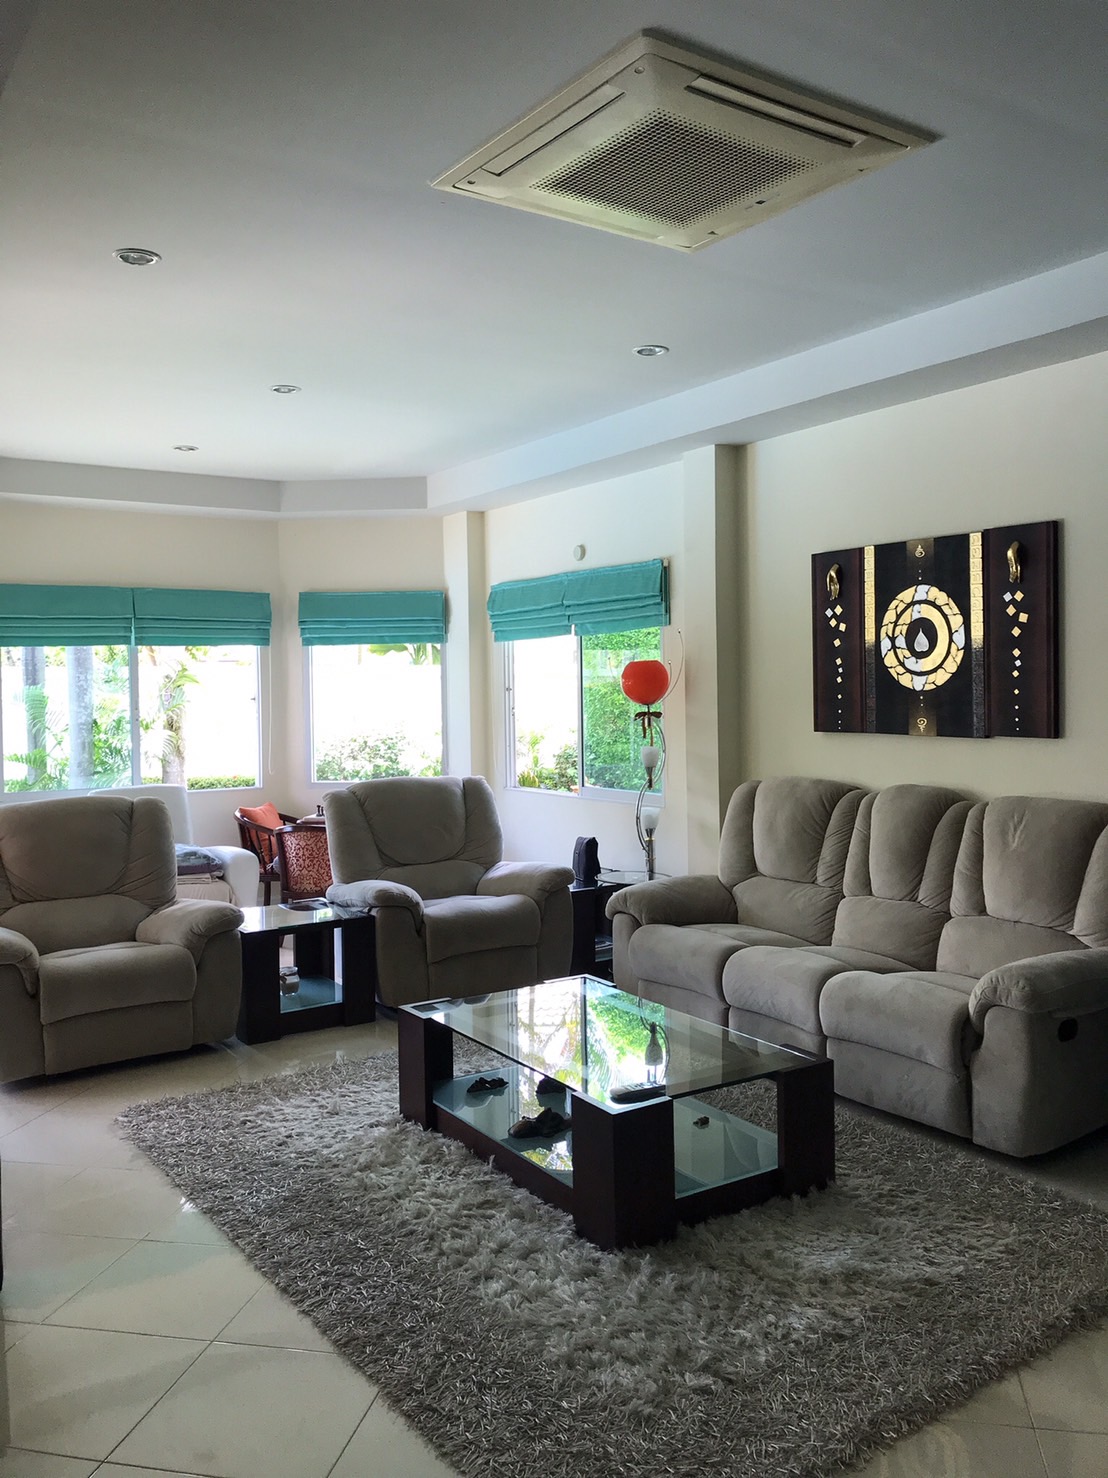 Greenfield village. 3 bedrooms Pool Villa, Soi Siam Country Club. Price reduced from 9.5m baht